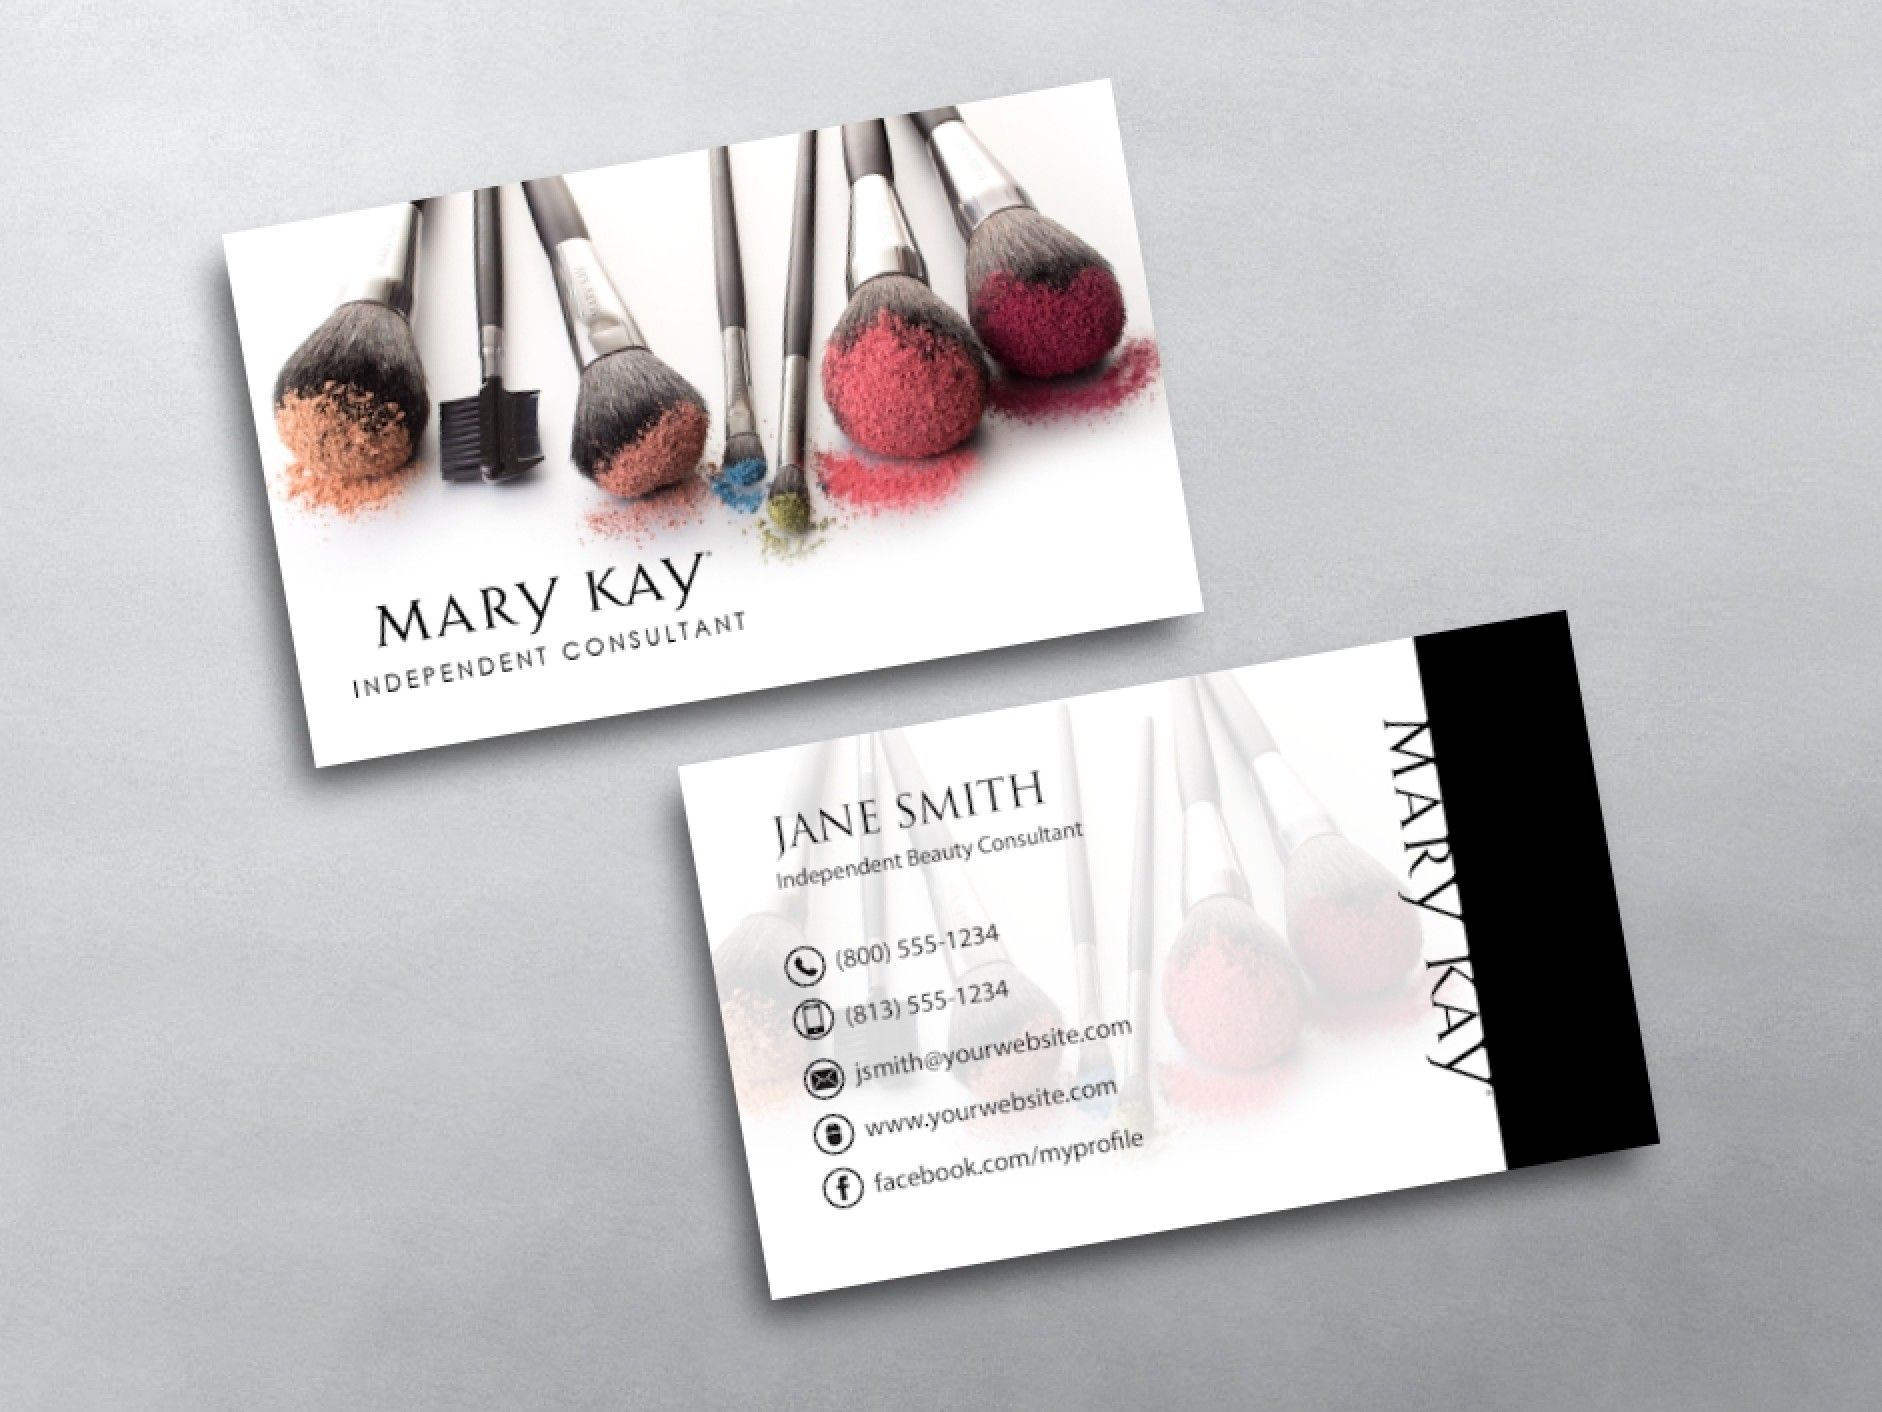 Mary Kay Business Cards In 2019 | Mary Kay, Makeup Artist Inside Mary Kay Business Cards Templates Free